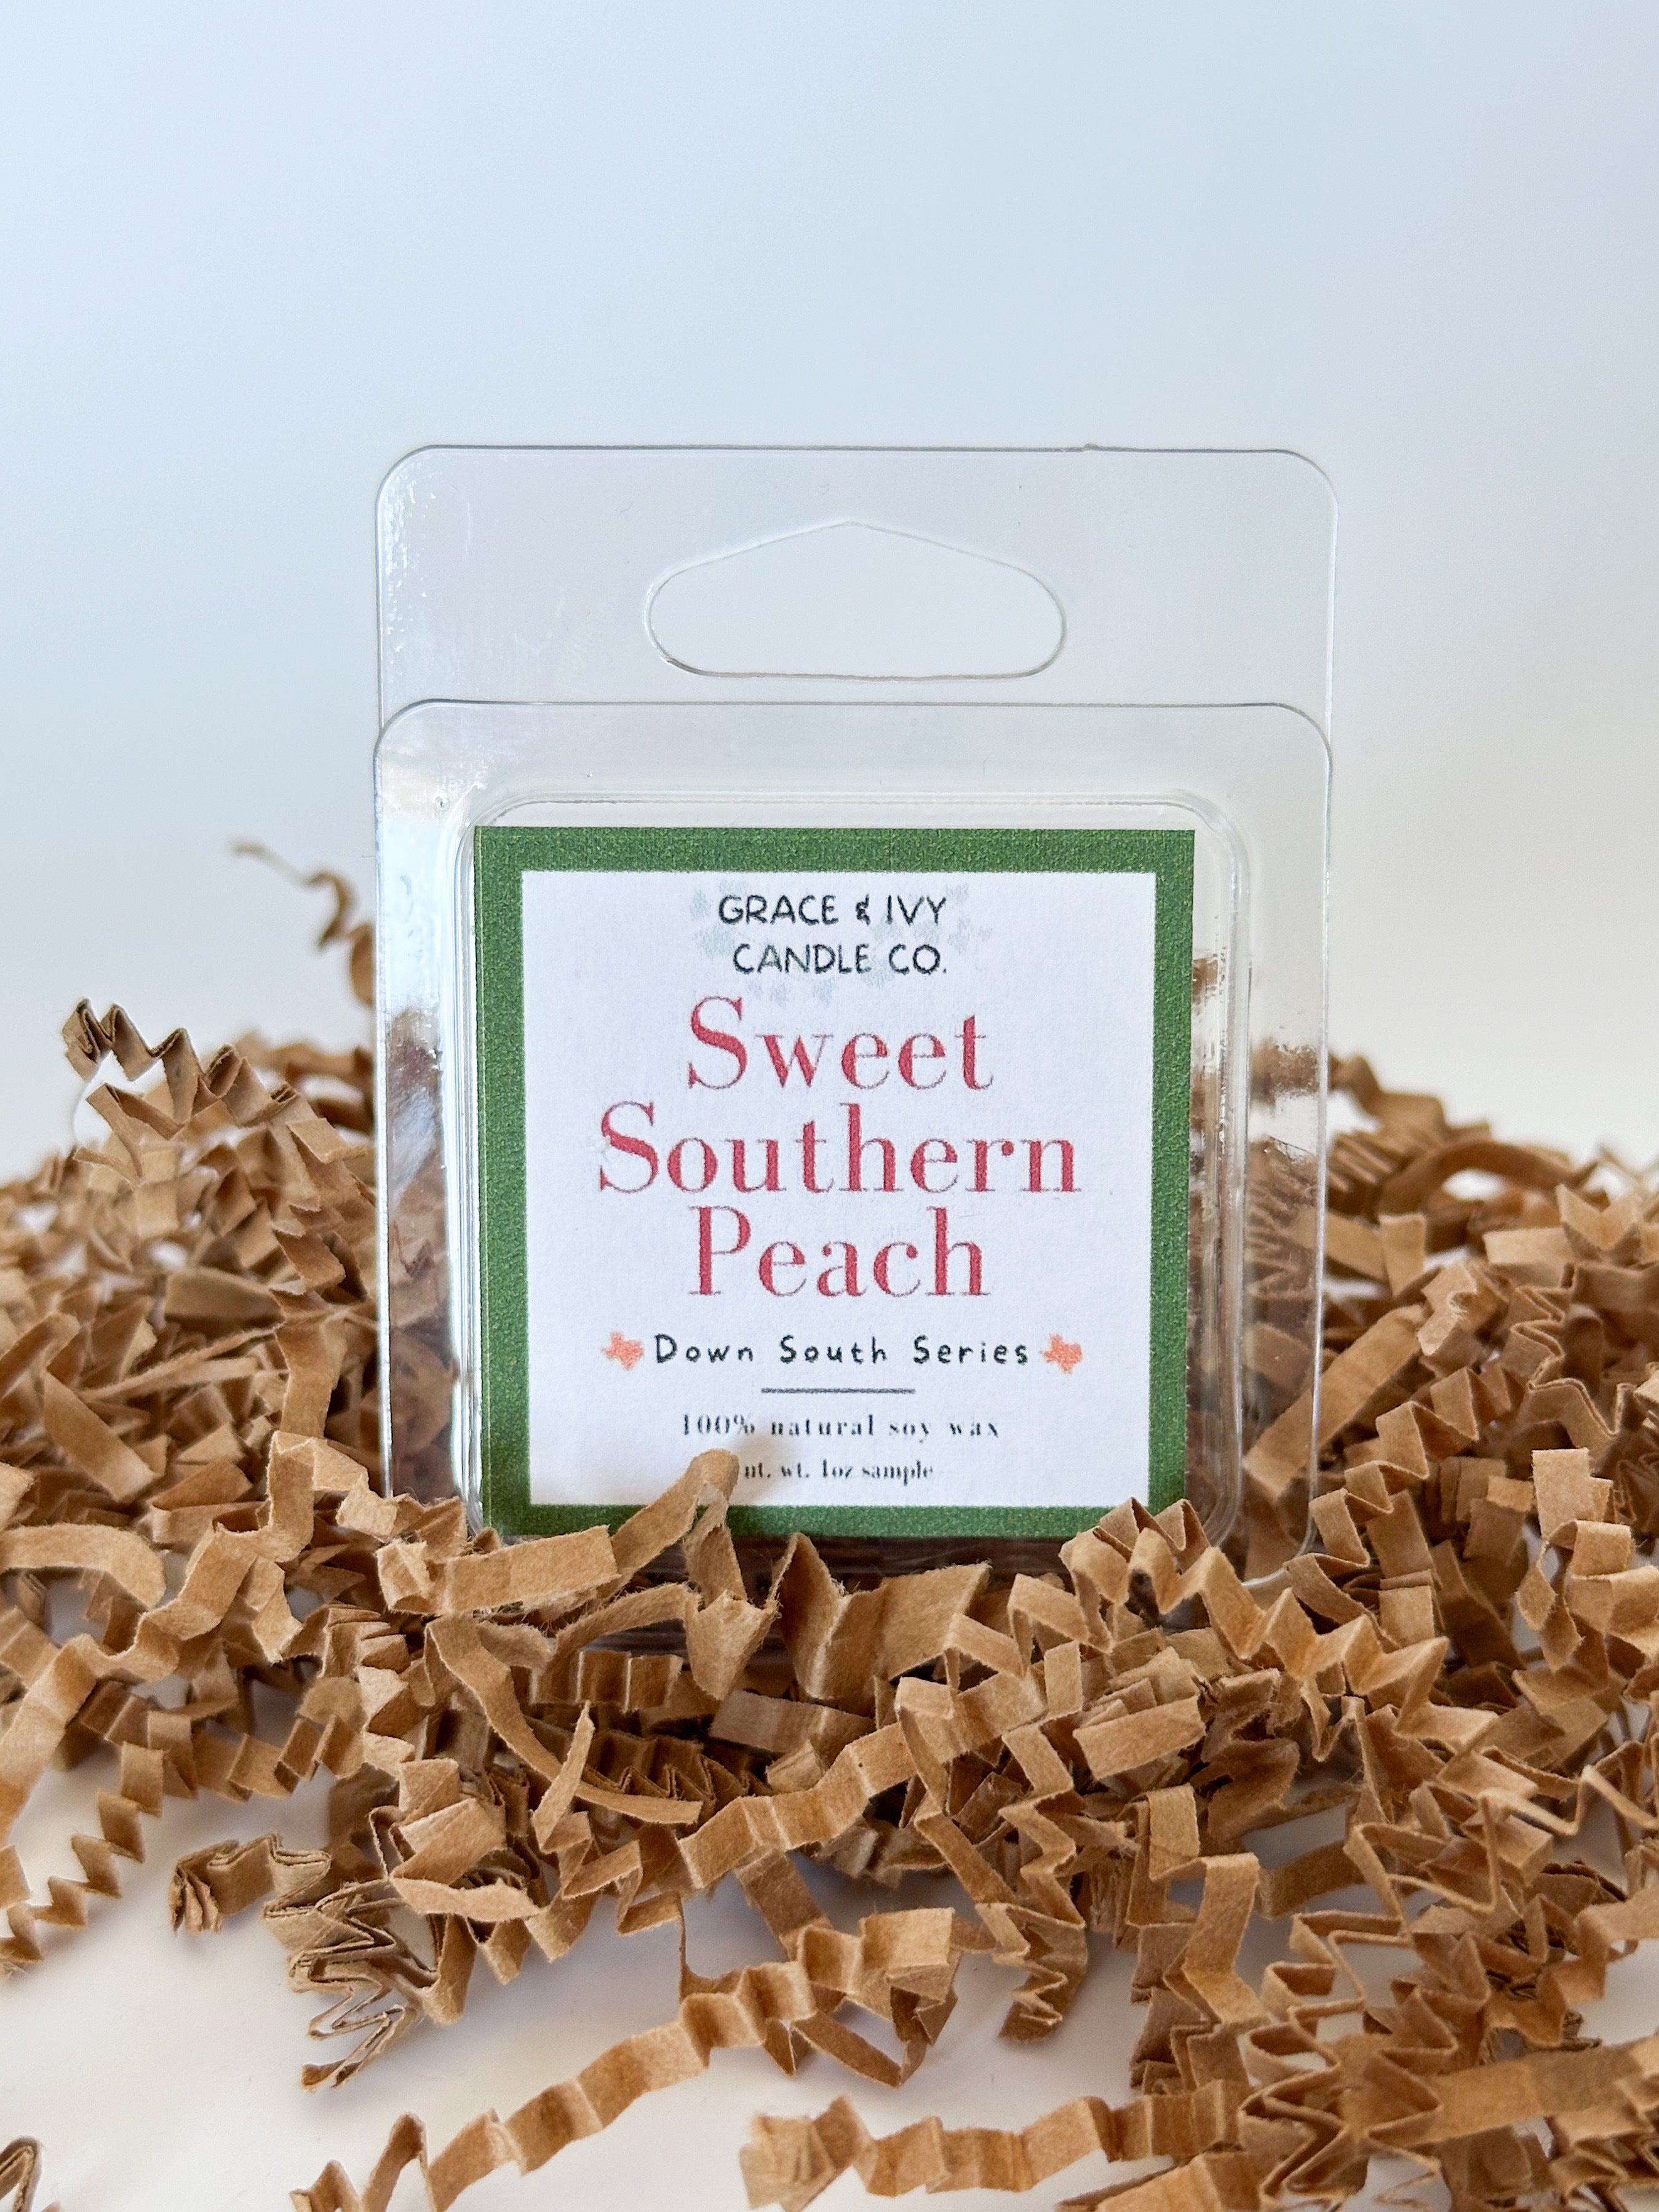 Down South Collection Scent Sampler Box